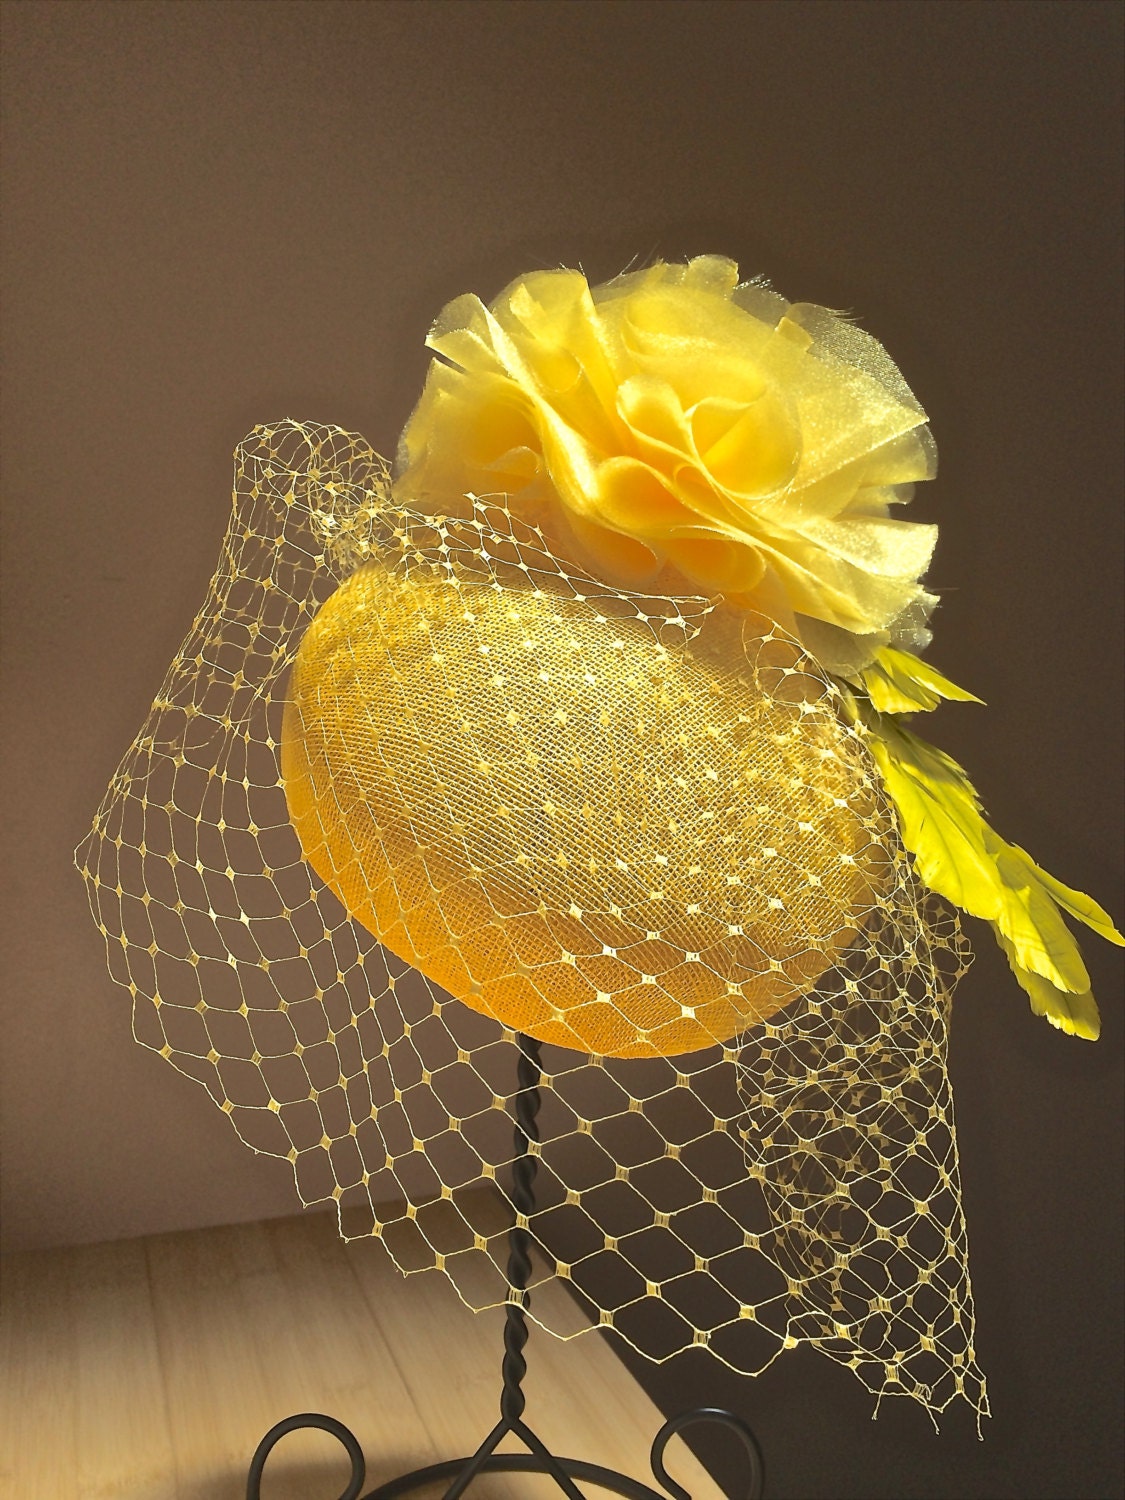 Yellow Sinamay Pill Box Hat with Veiling, Canary Yellow hat, Church hat, Veiling.Wedding fascinator, Royal Ascot, KentuckyDerby, Race Hat